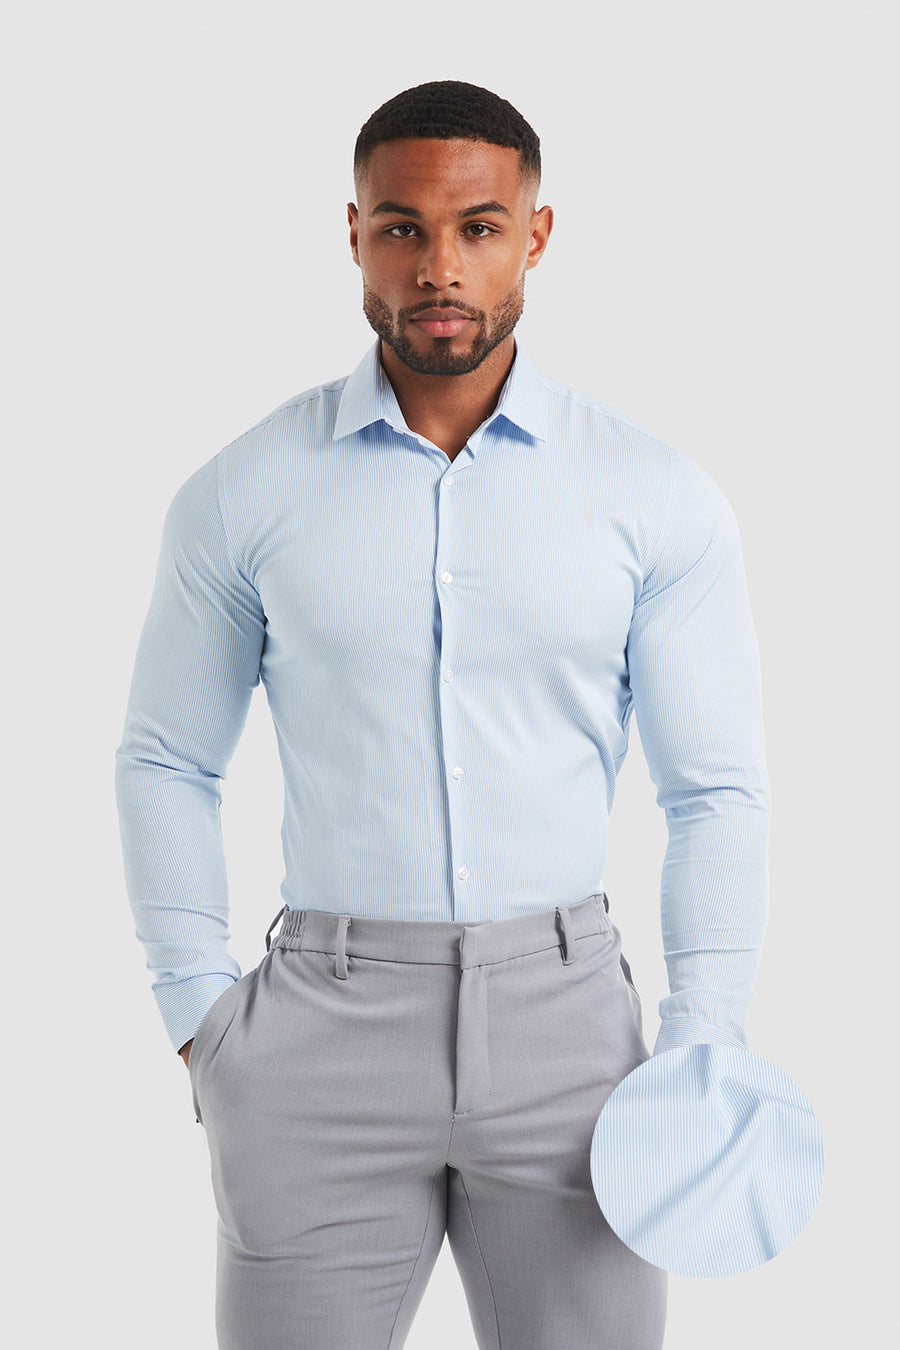 Performance Business Shirt in Blue Stripe - TAILORED ATHLETE - USA